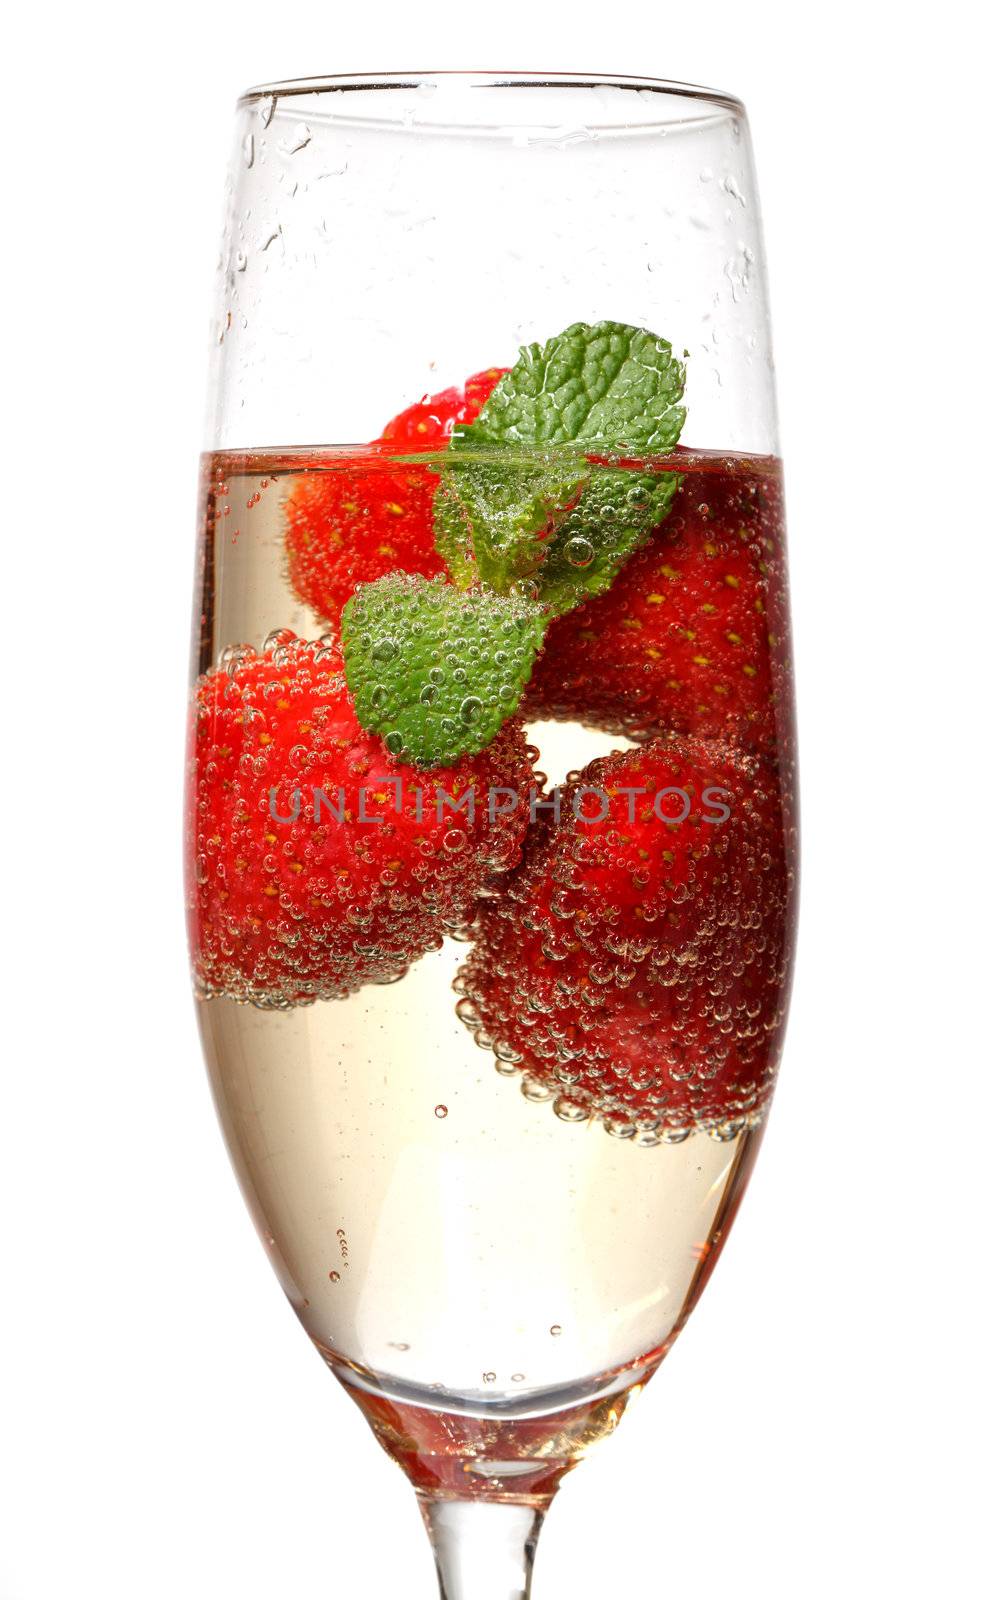 Glasses of sparkling wine and strawberry on white